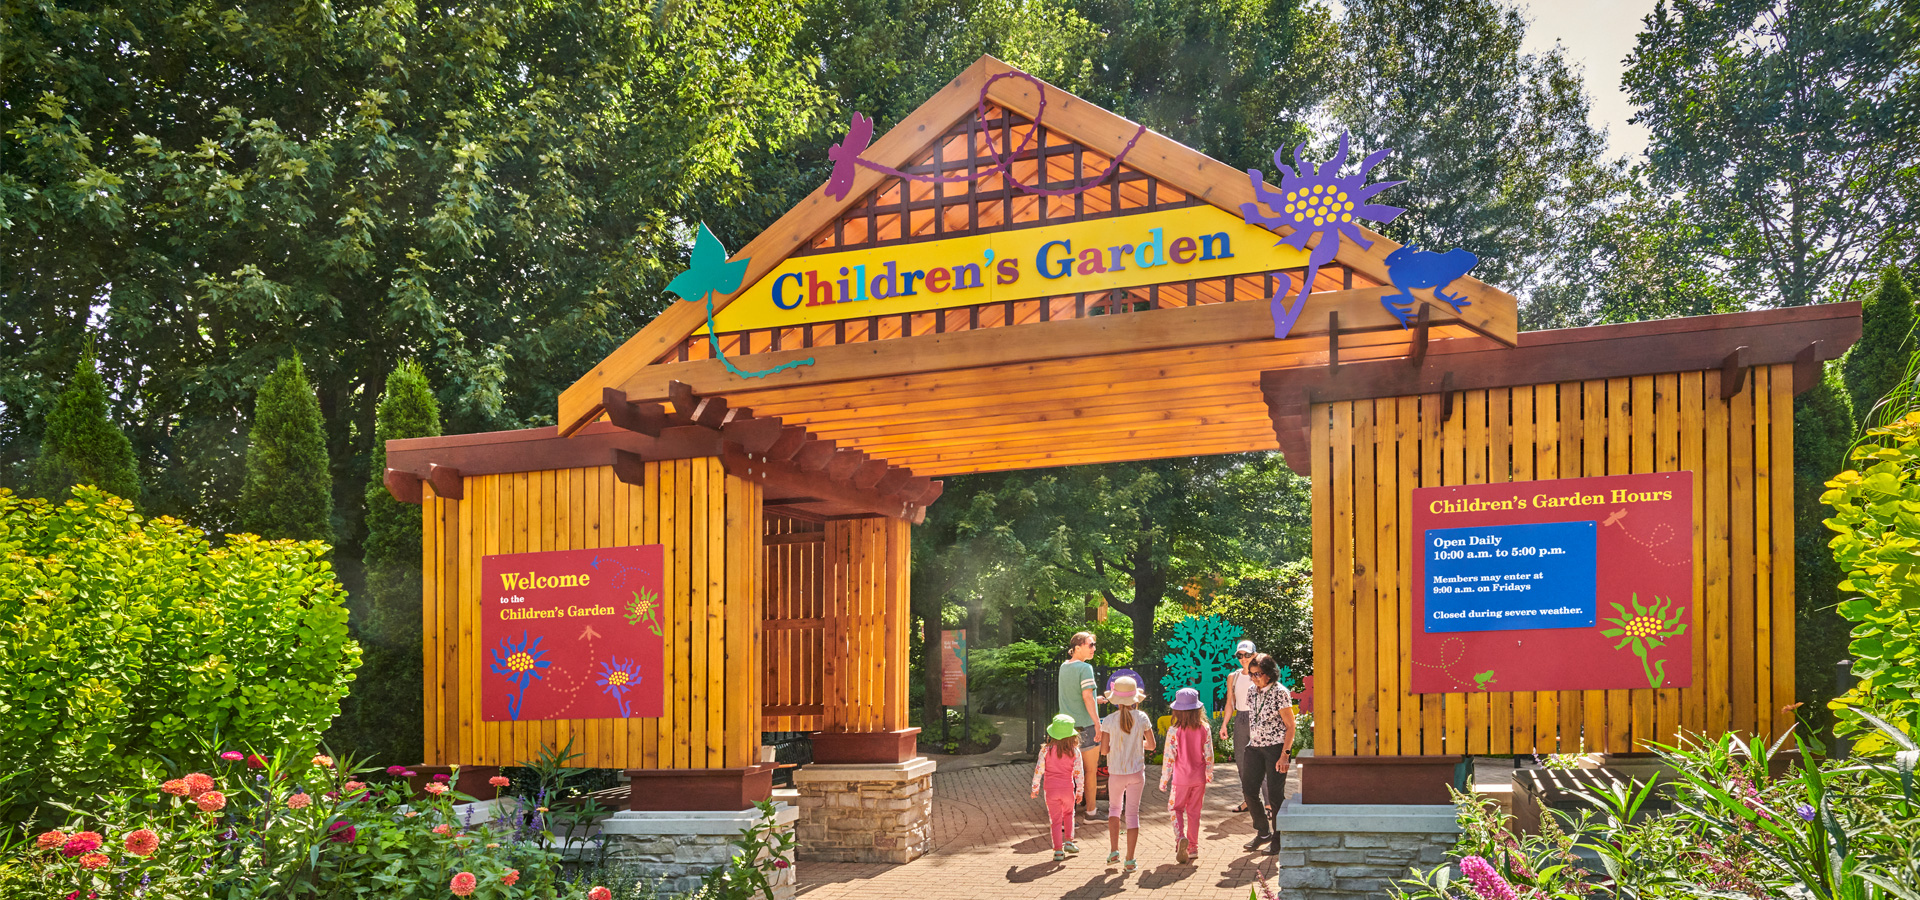 A new Children's Garden entrance with guests walking in